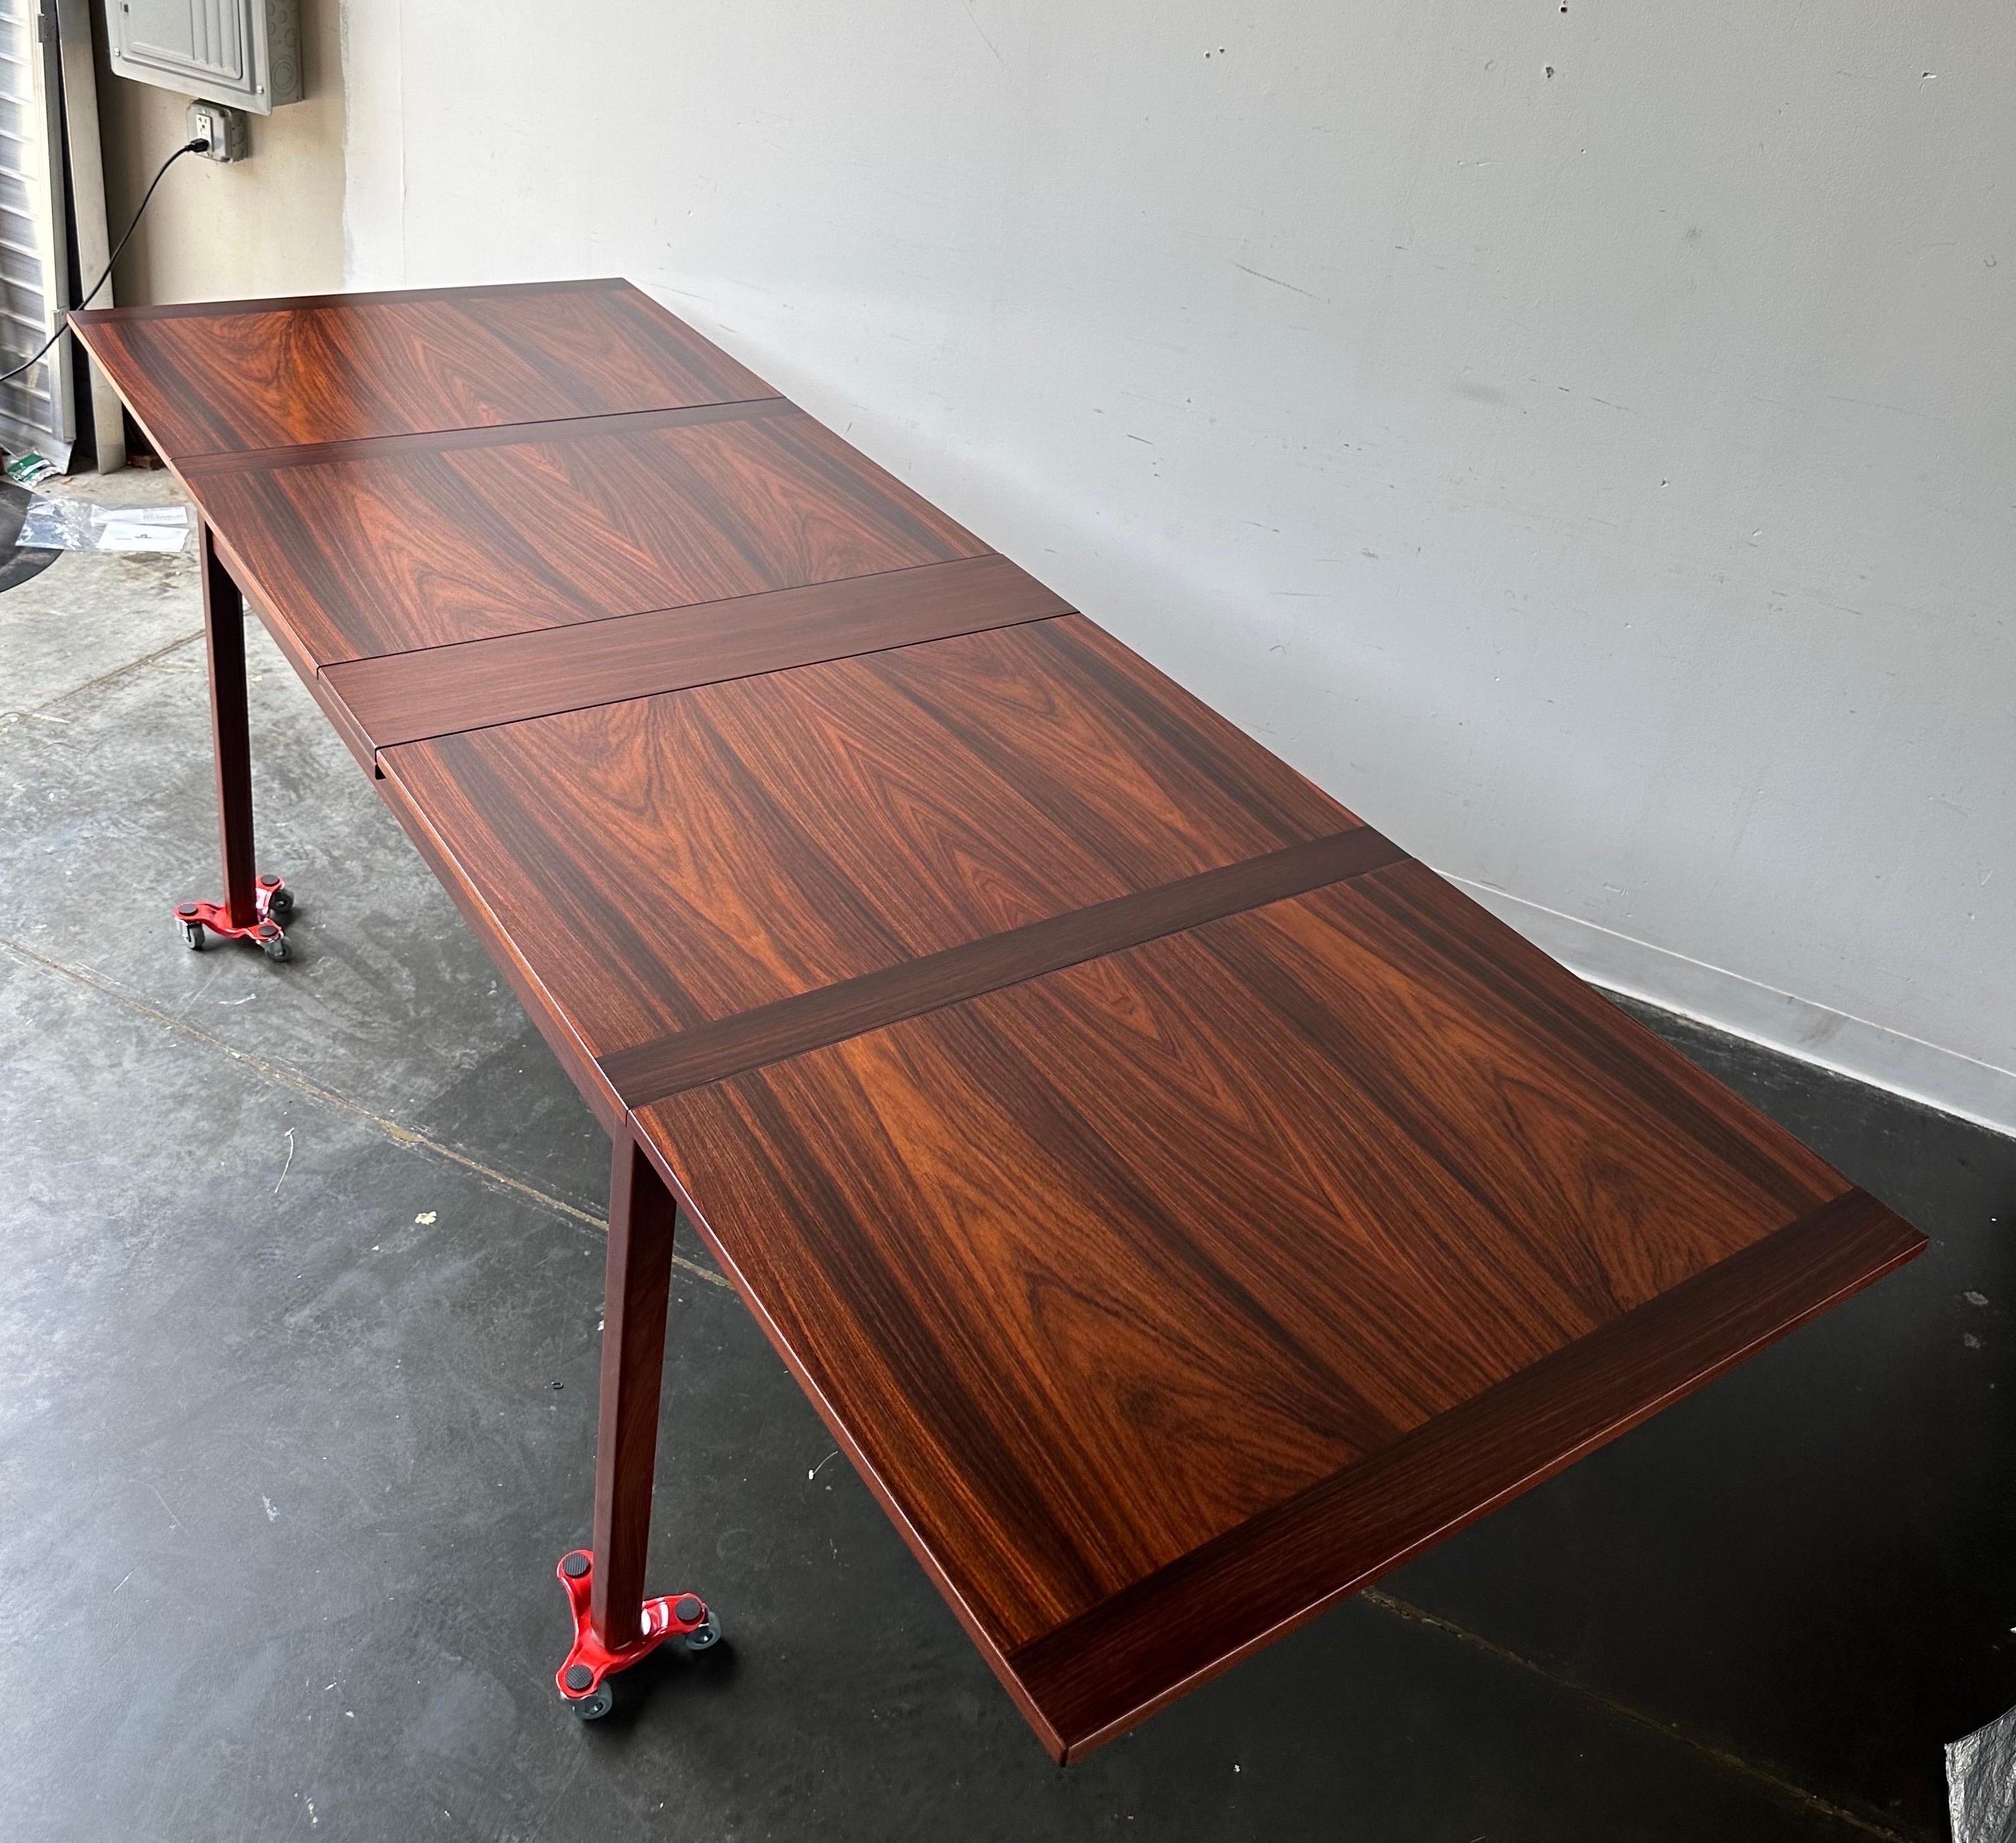 Professionally refinished stunning rosewood flip top dining table by Skaraborgs Sweden circa 1960.

Gorgeous table that extends from 54” to 102” flip a simple flip ( see video )